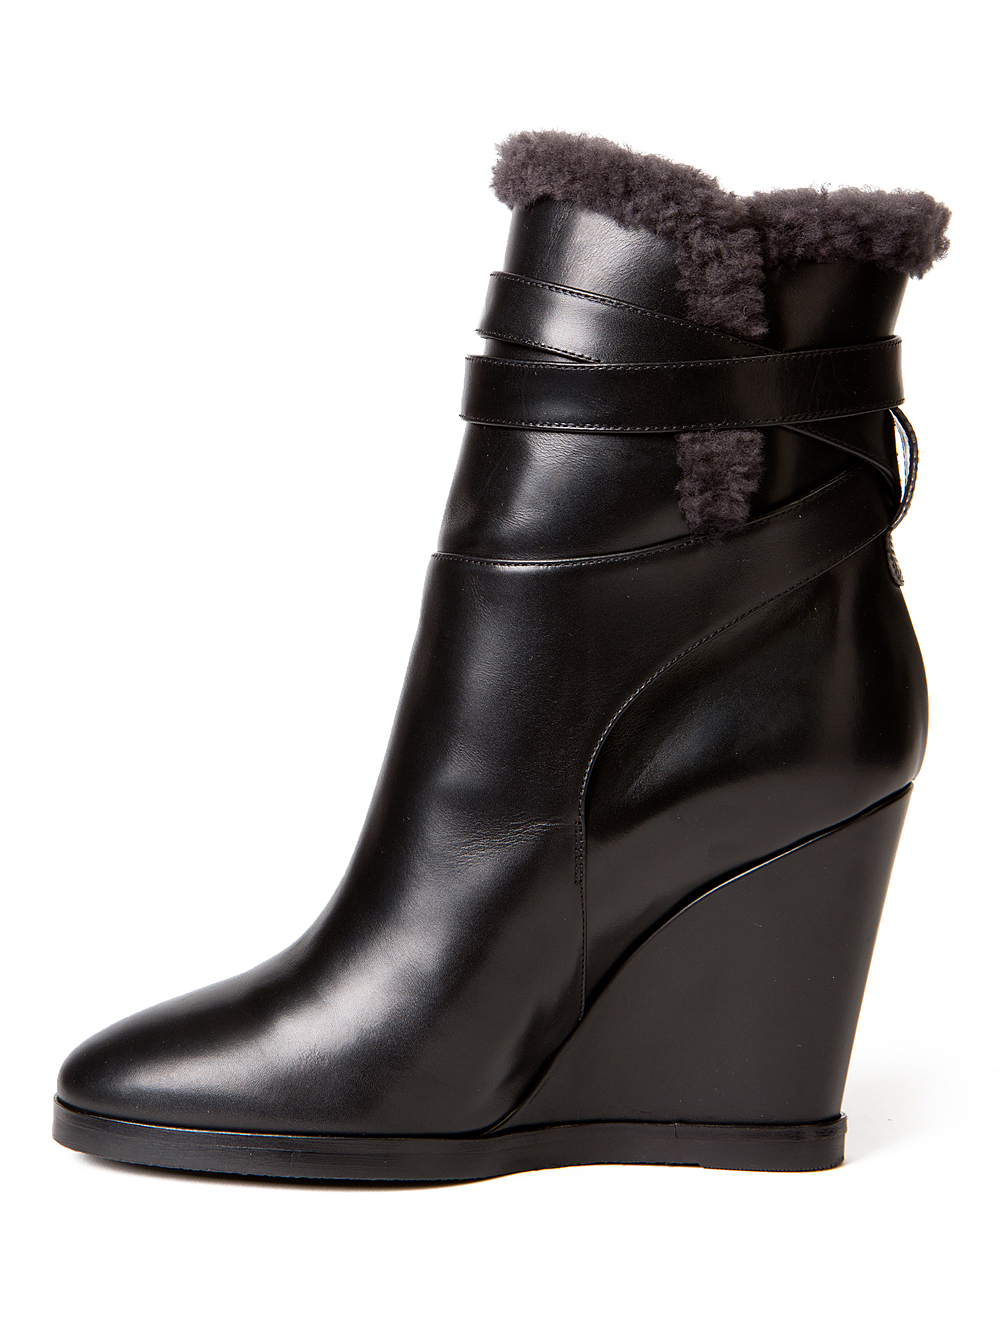 Lyst - Fendi Shearling Leather Wedge Boots in Black